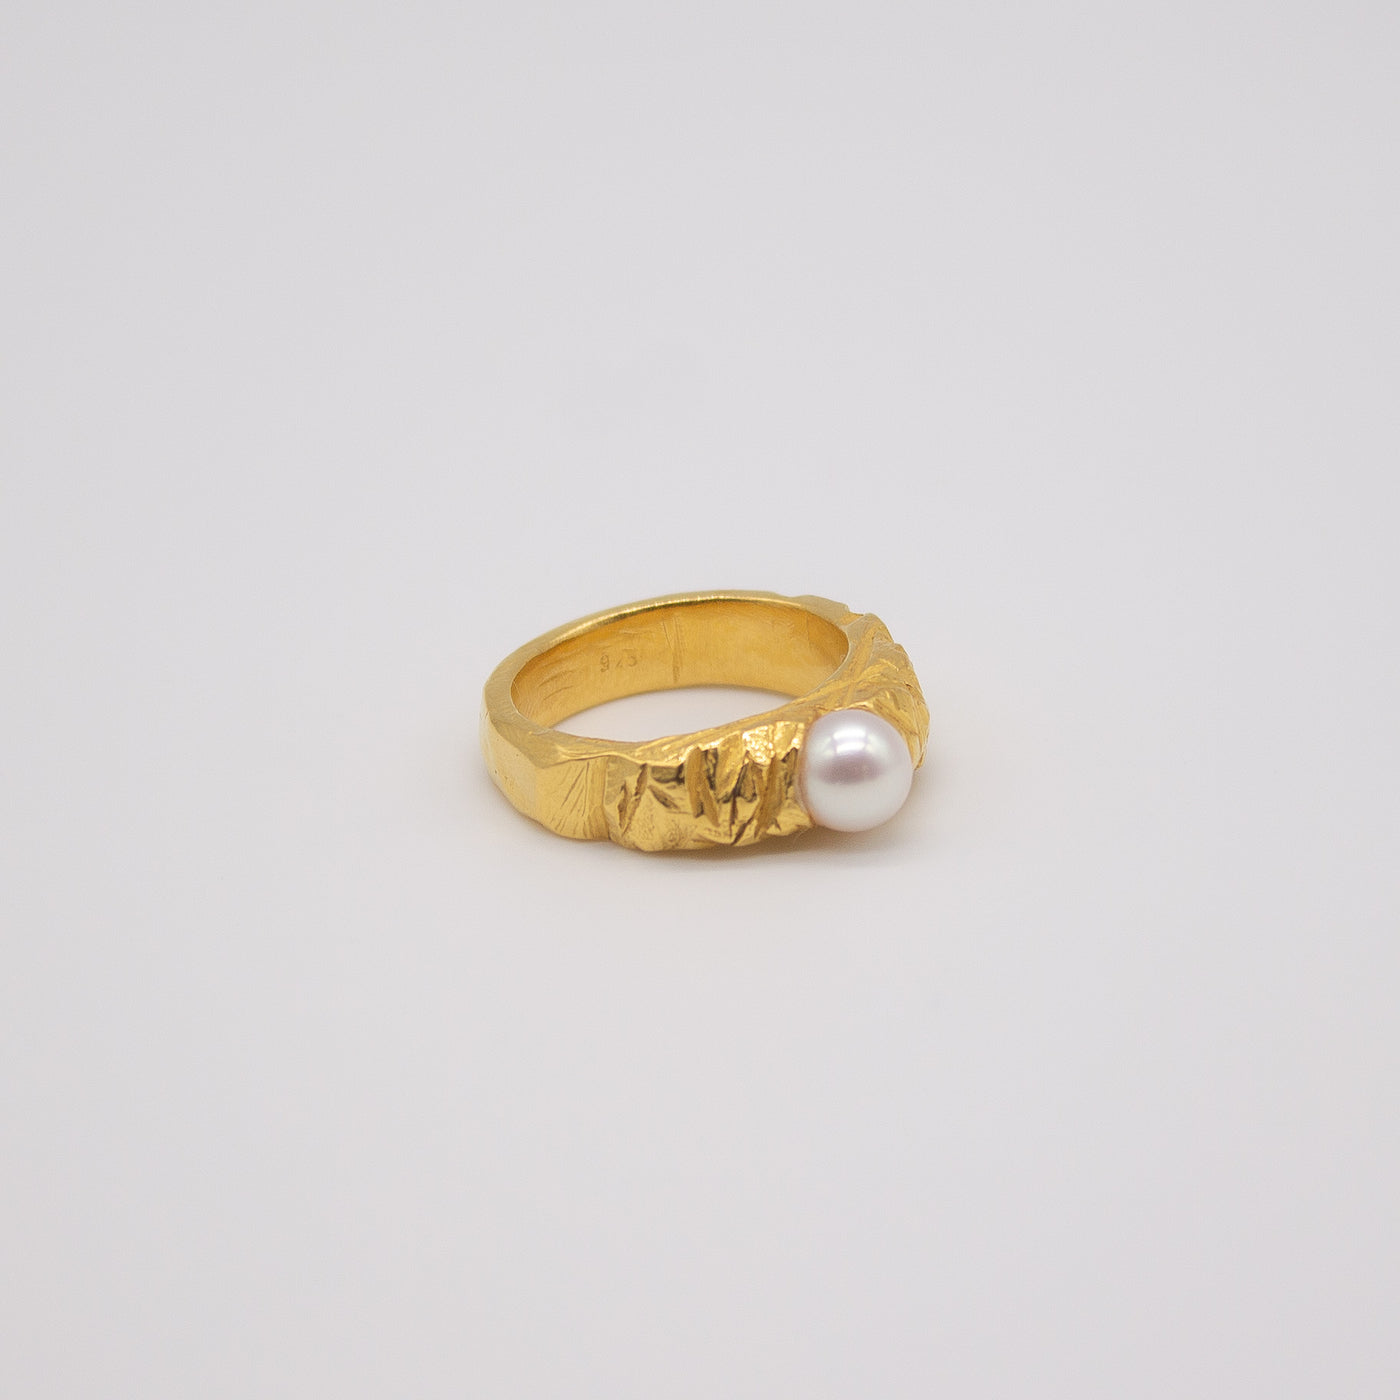 VESTERVIK // Gold-plated ring with a small freshwater pearl